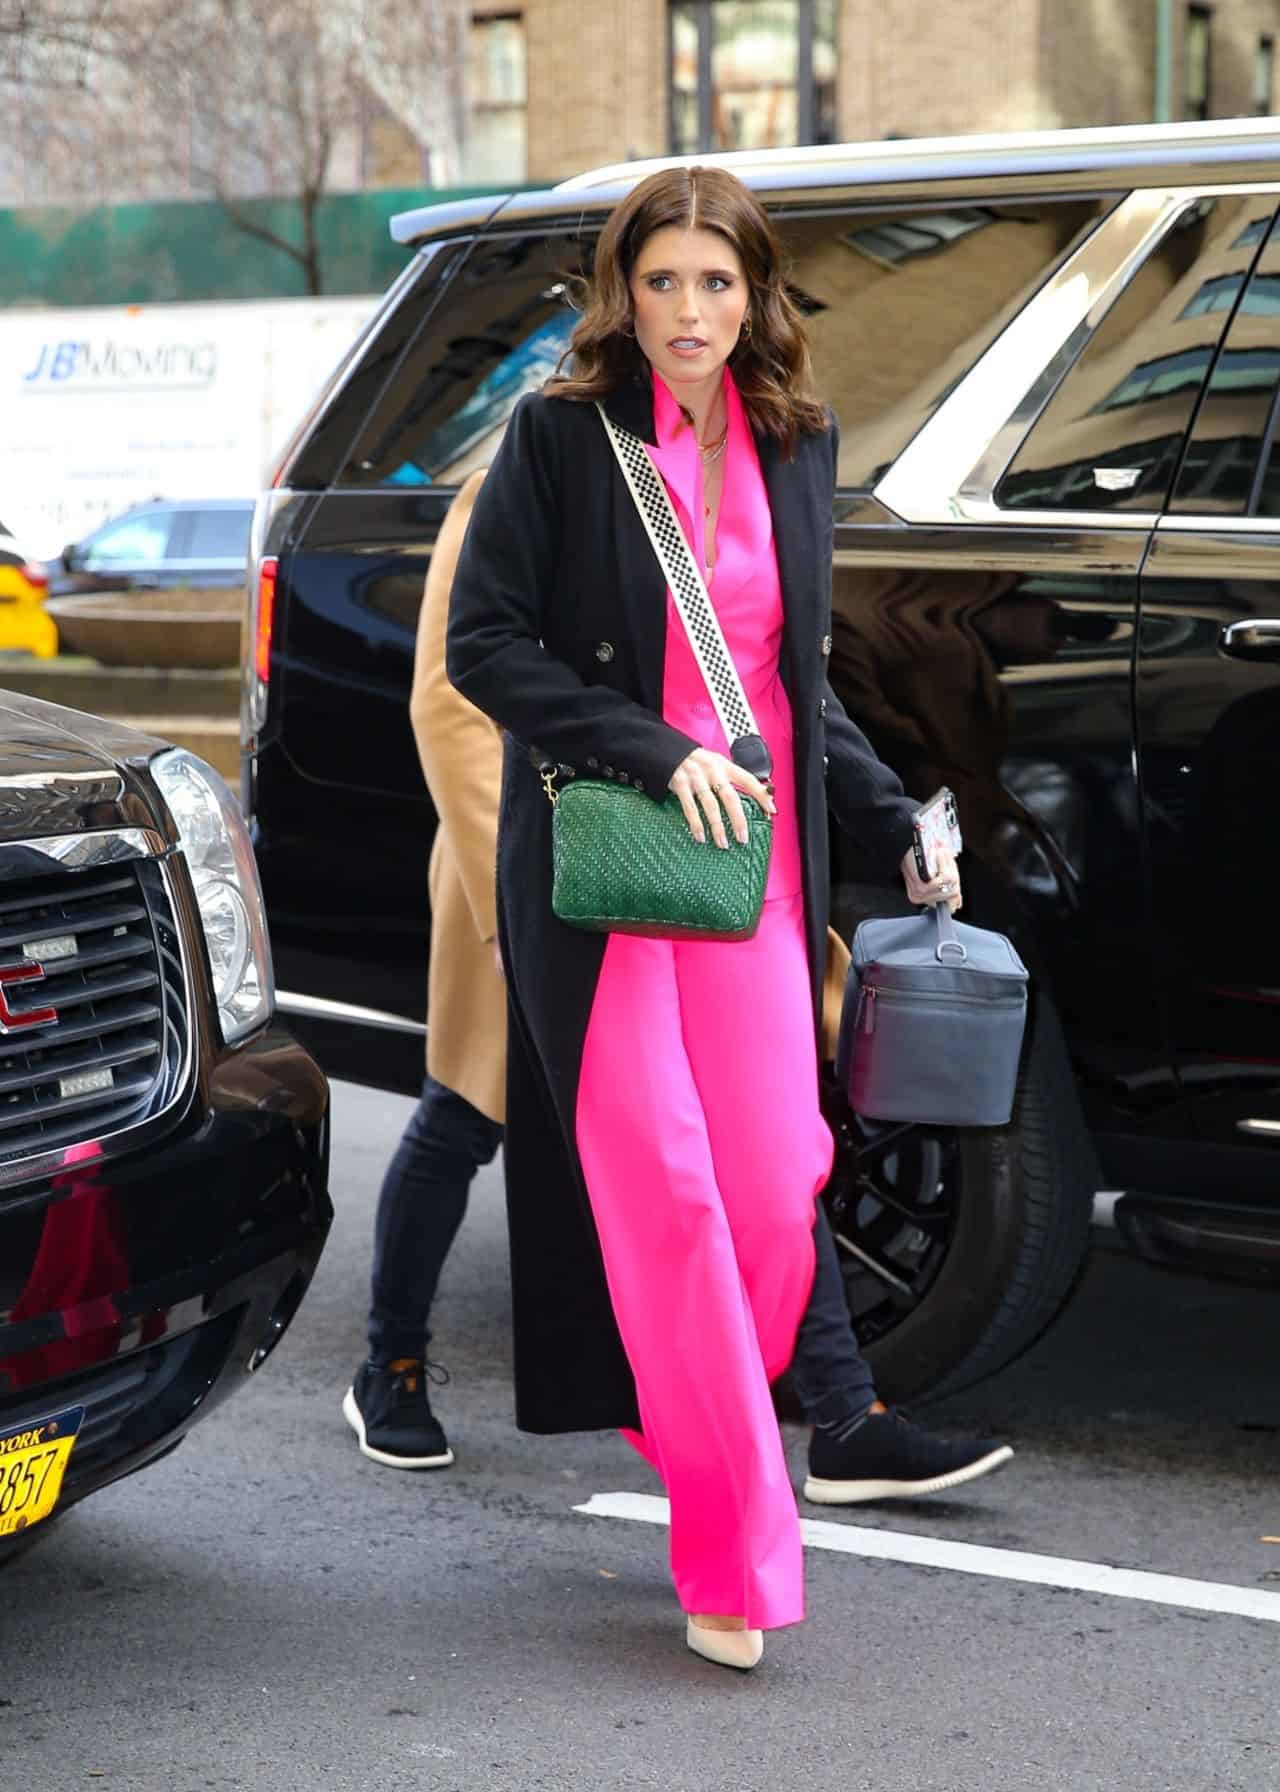 Katherine Schwarzenegger Commands Attention in Hot Pink Co-ord During NYC Press Tour for Latest Children's Book